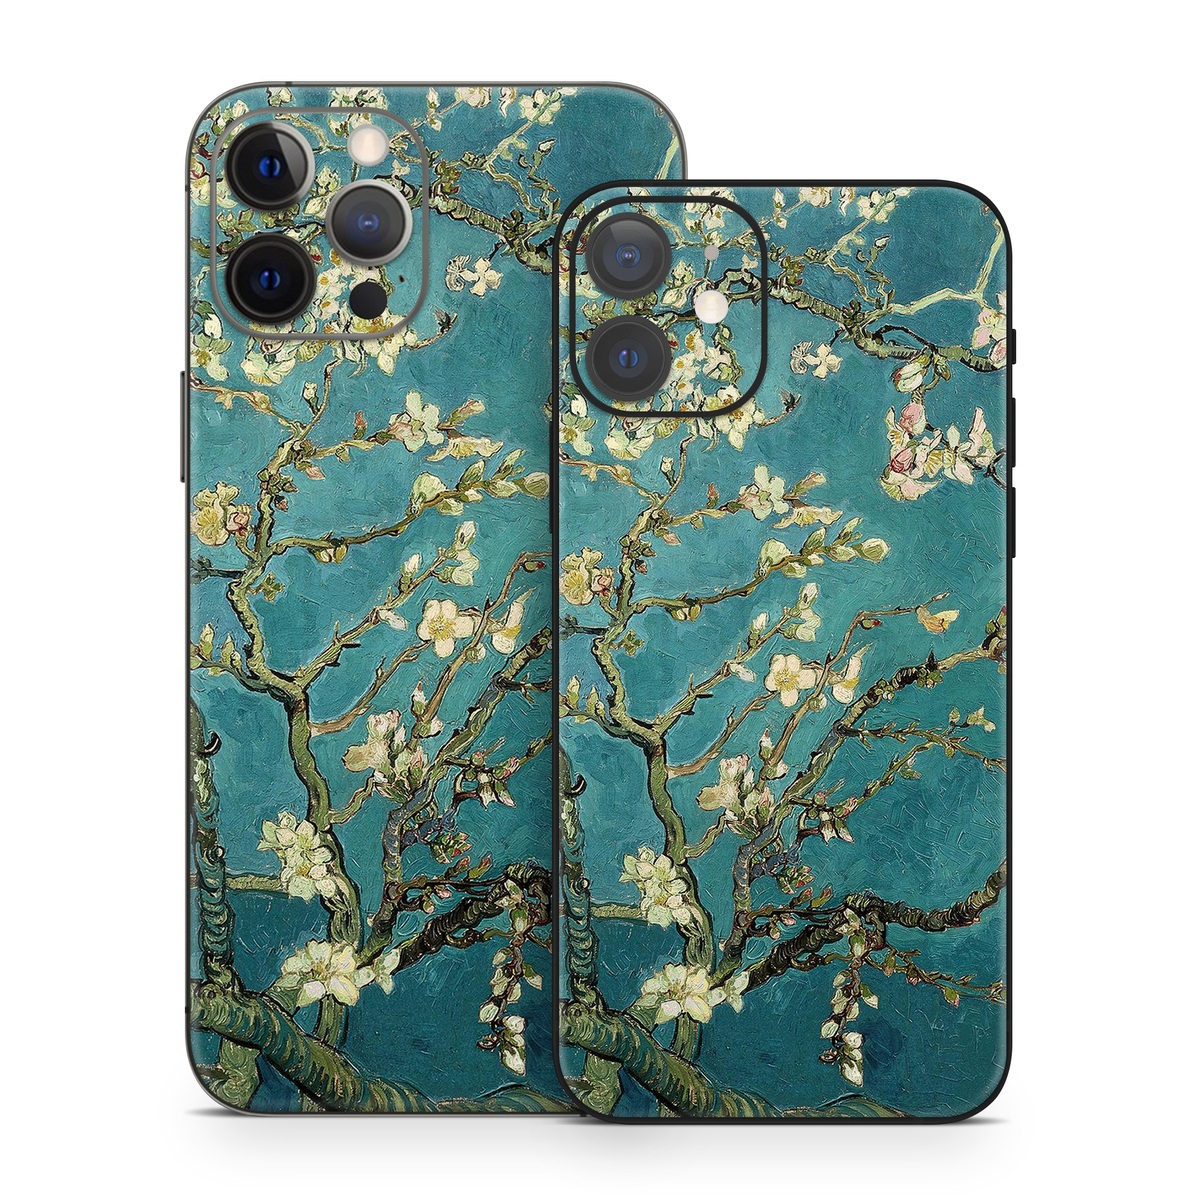 iPhone 12 Skin design of Tree, Branch, Plant, Flower, Blossom, Spring, Woody plant, Perennial plant with blue, black, gray, green colors